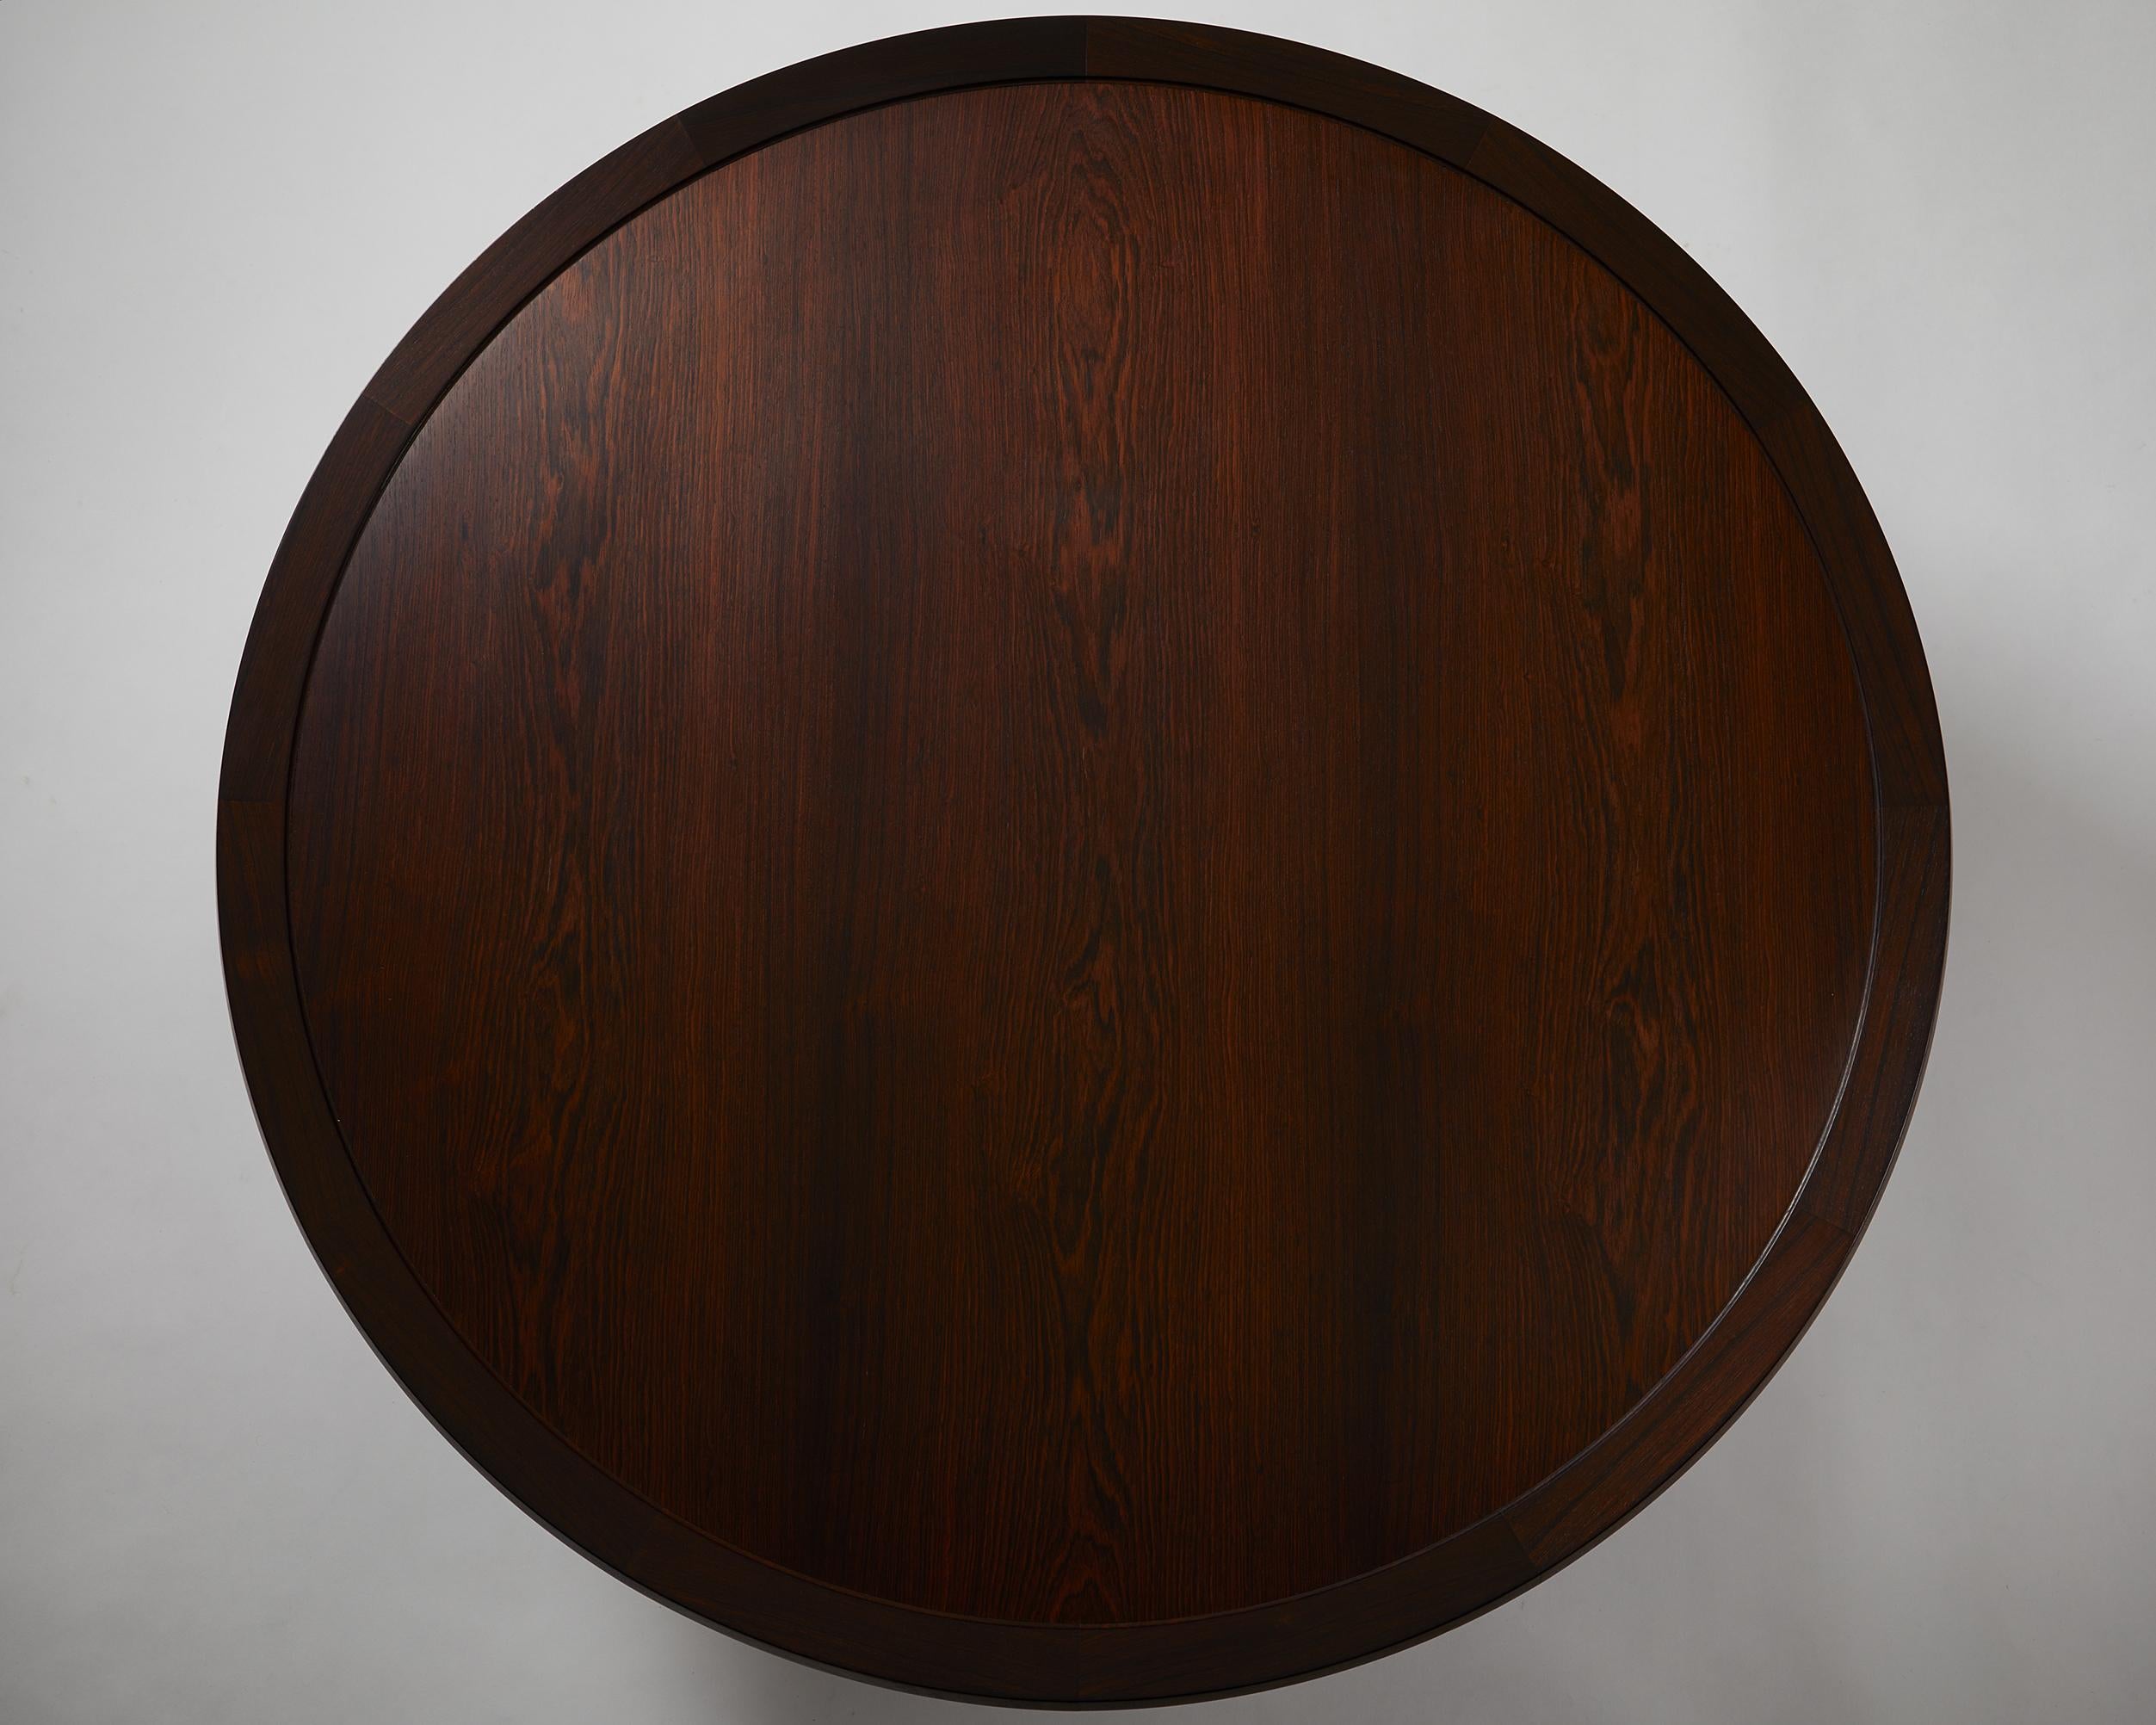 Danish Occasional Table Designed by Frits Schlegel, Rosewood and Brass, Denmark, 1949 For Sale